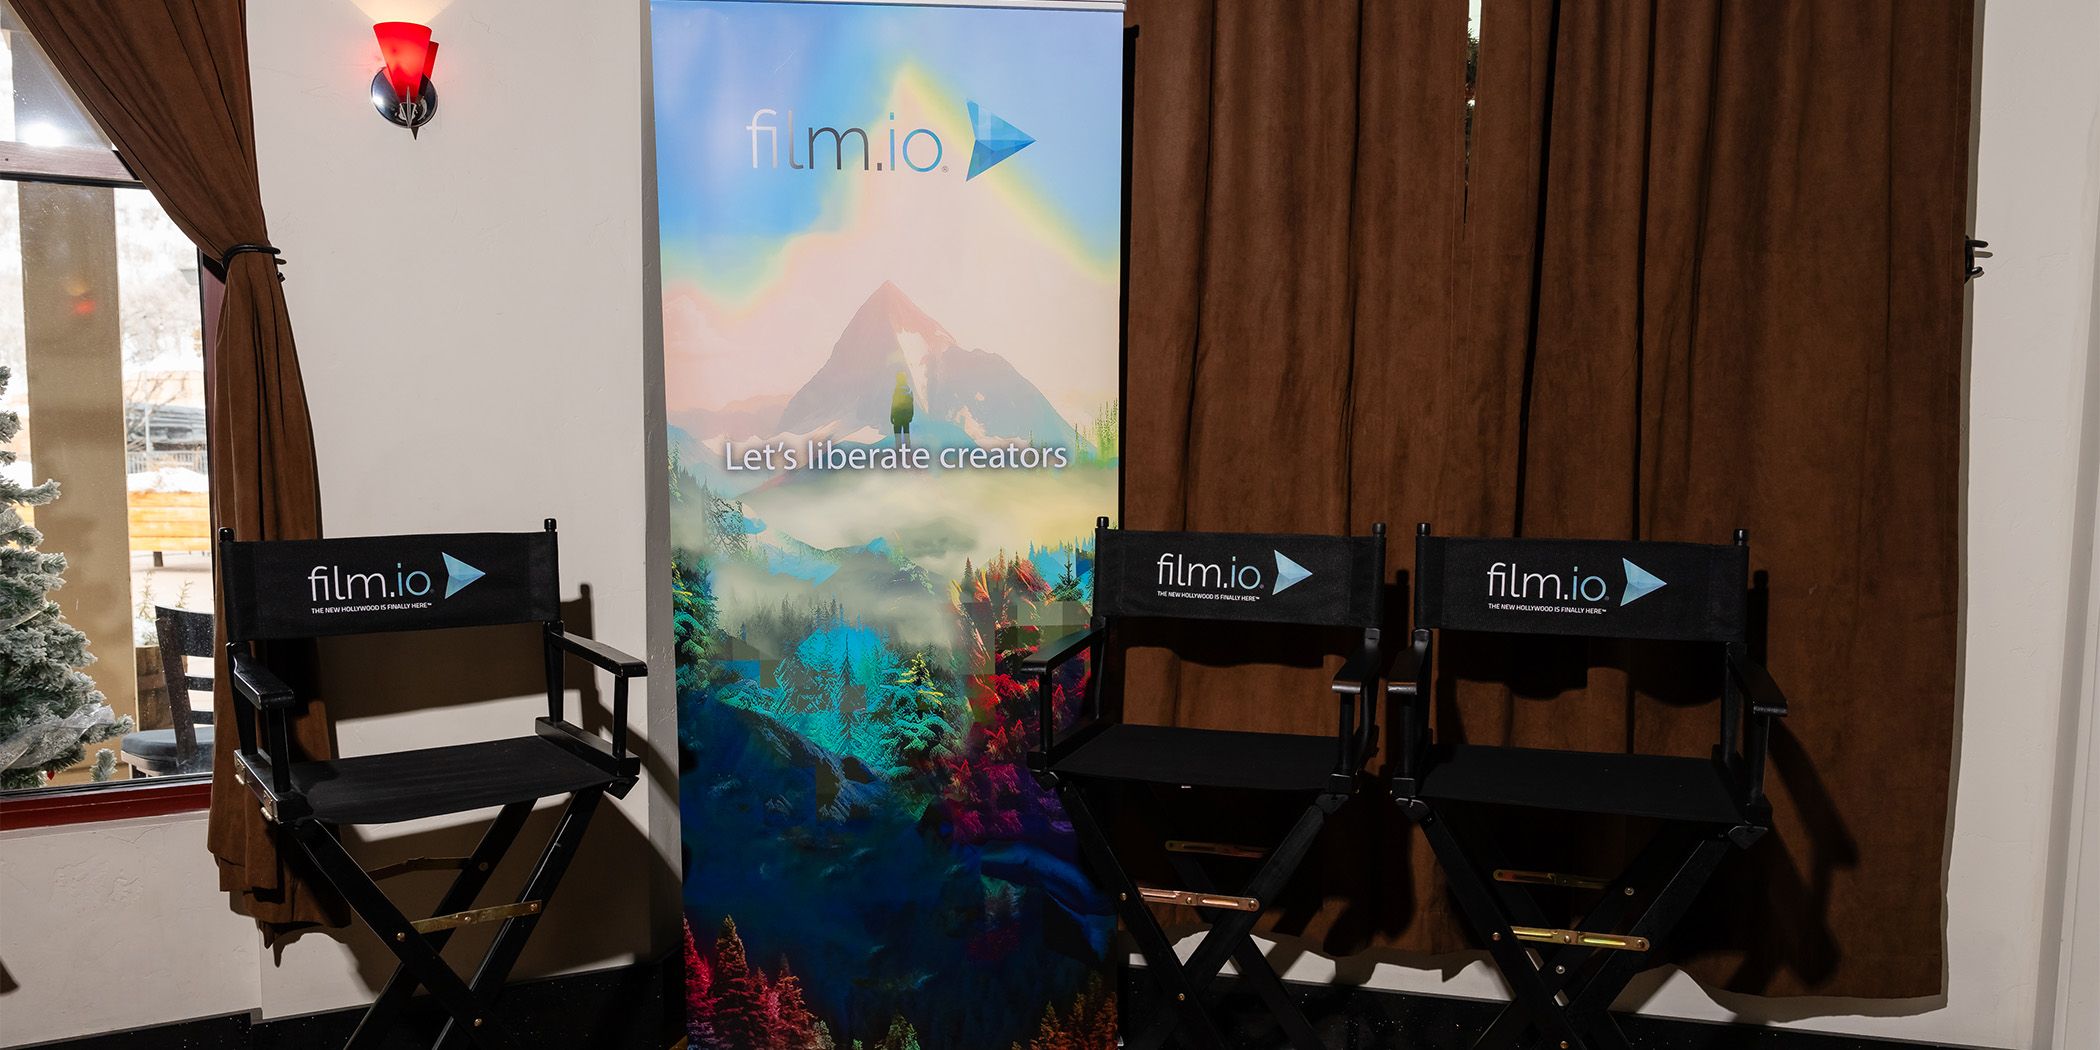 Image of the Collider Studio at Sundance with sponors film.io